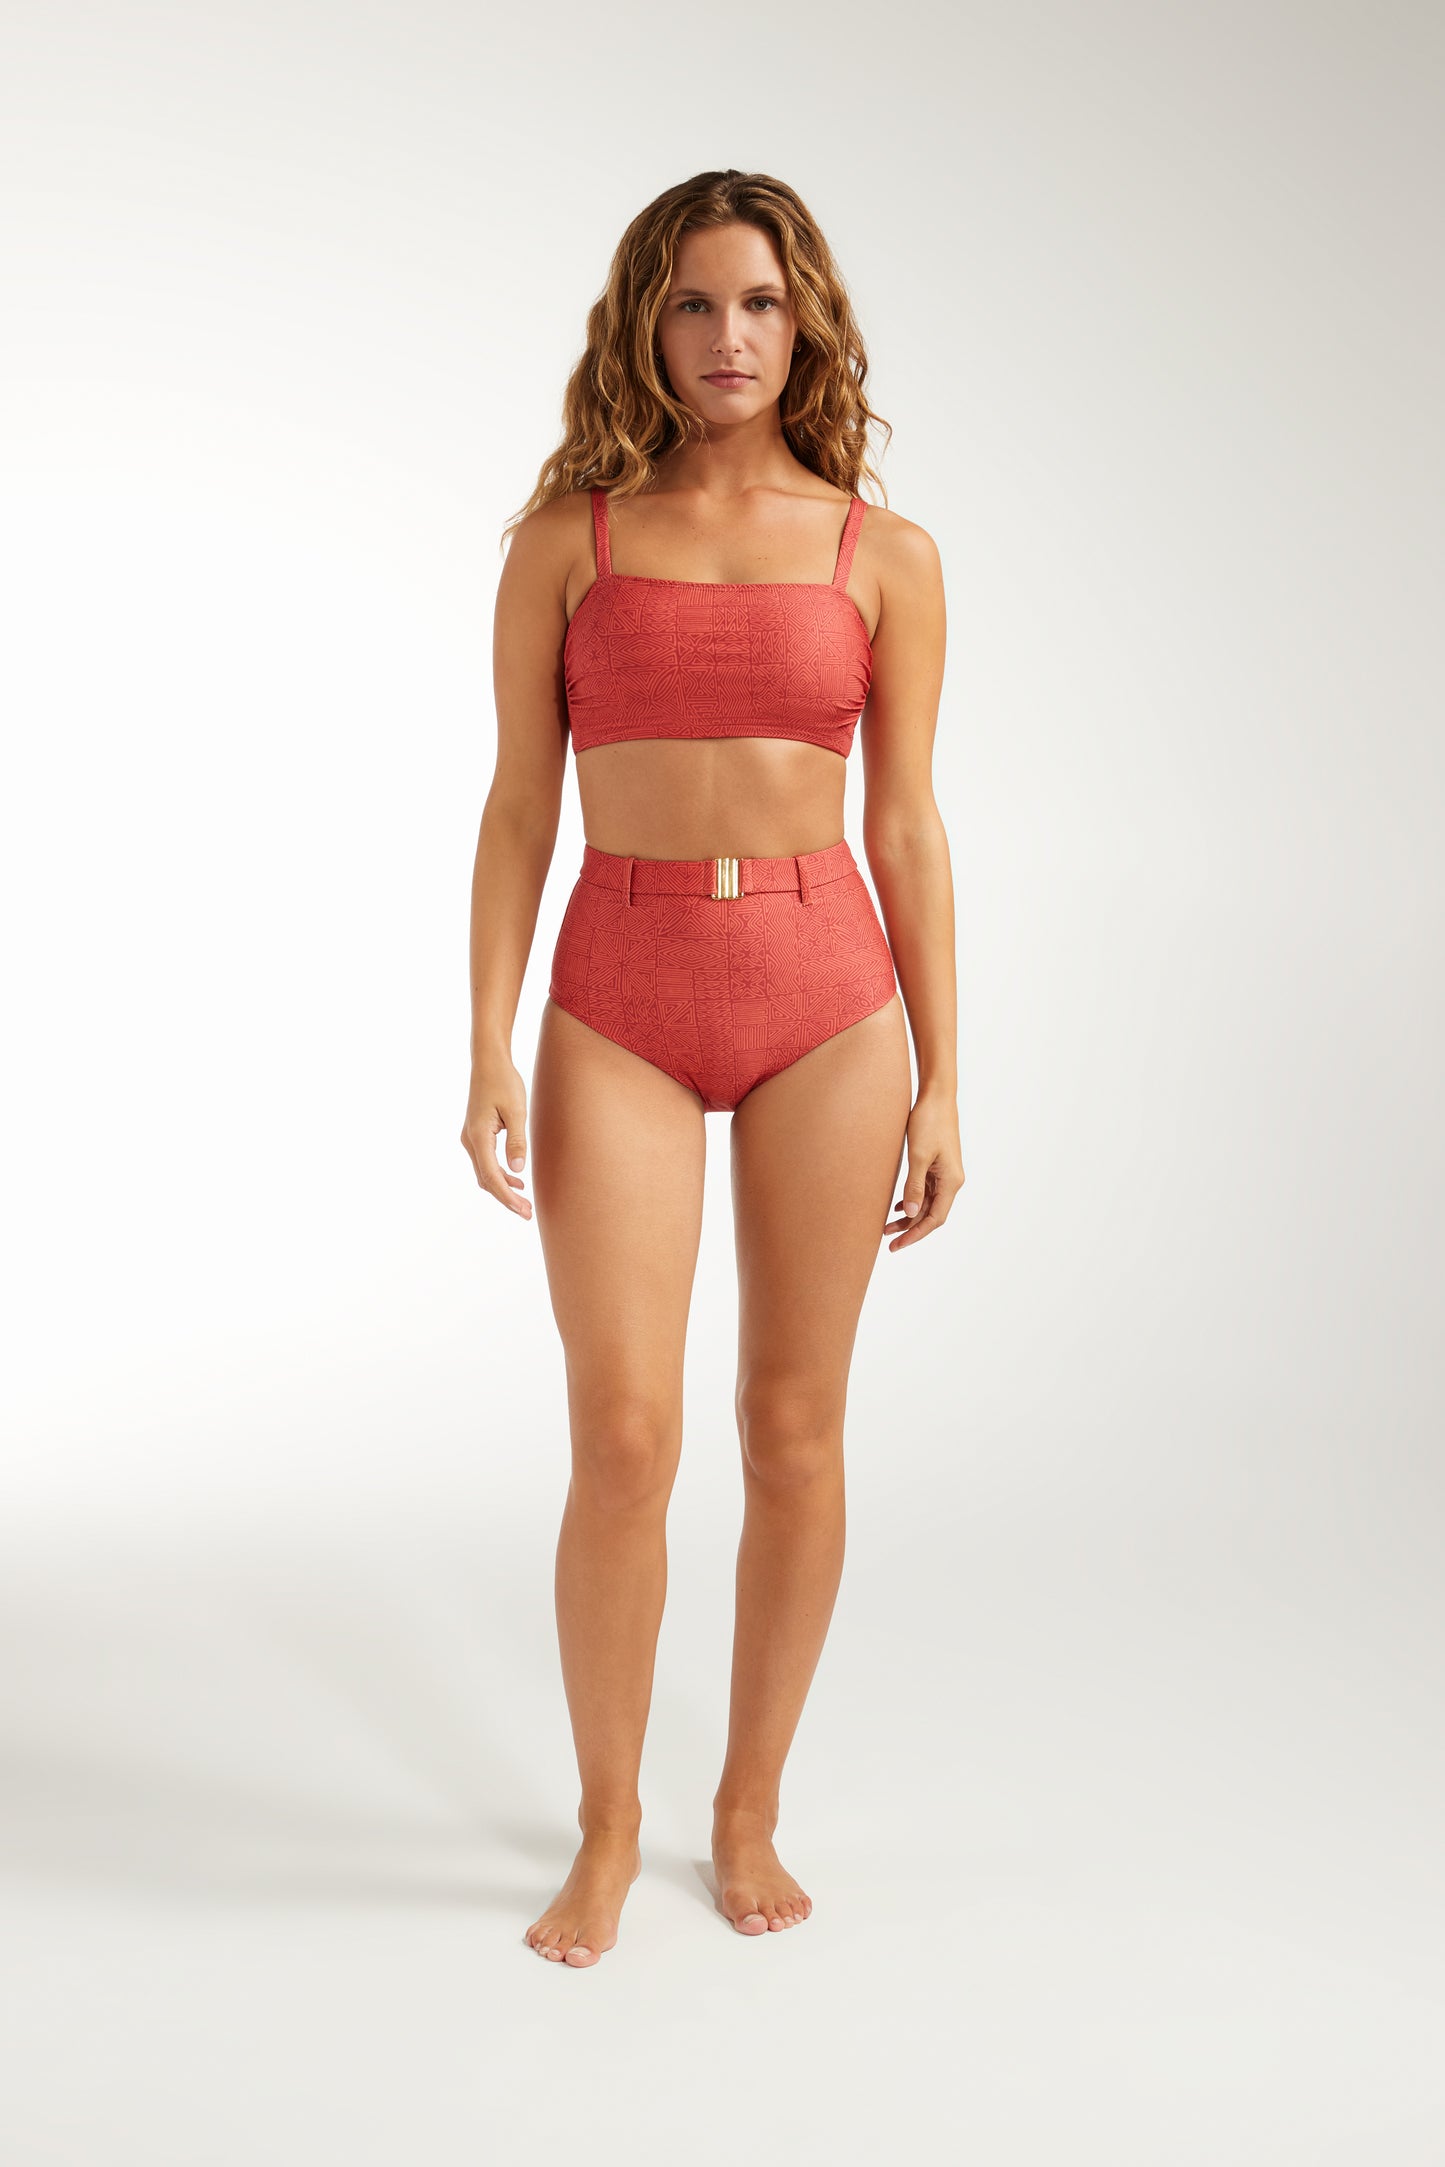 Woman Wearing High Waisted Full Coverage Two Piece Bathing Suit